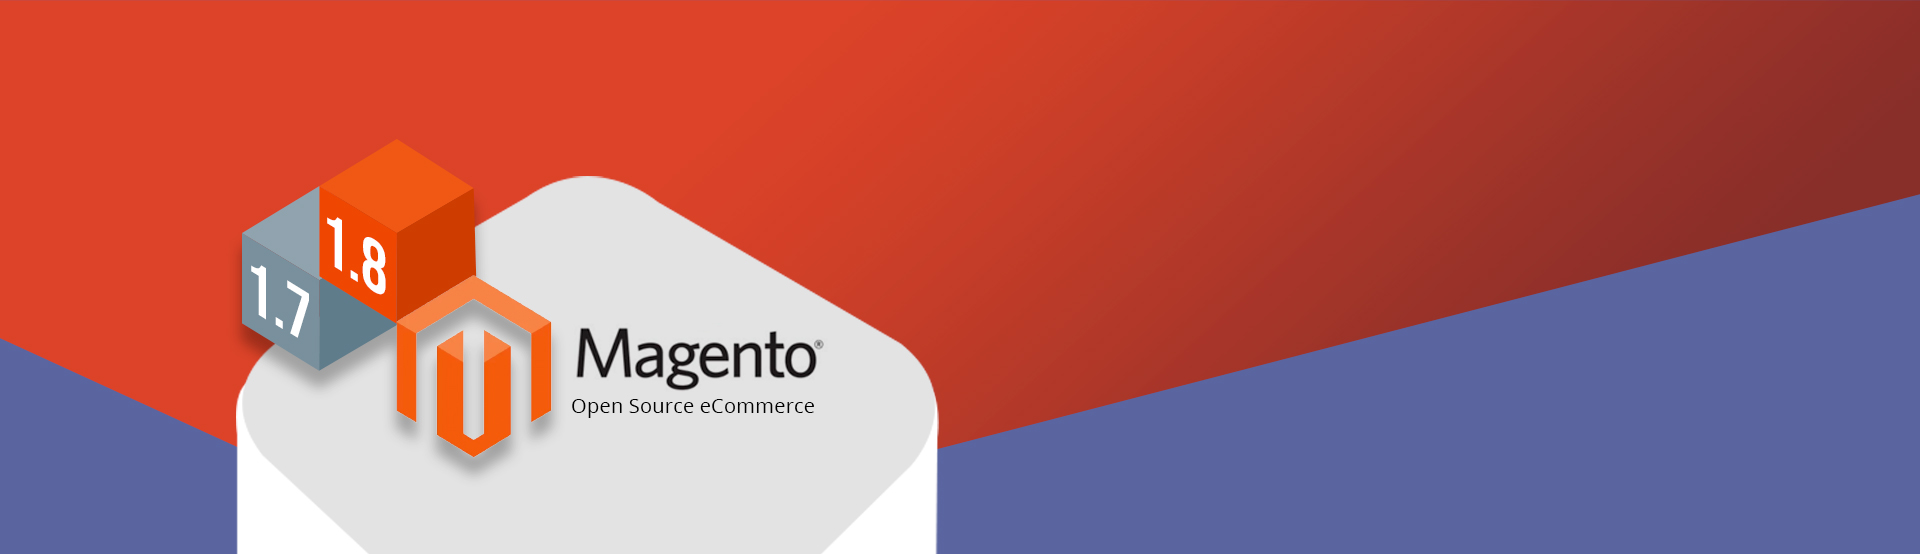 Learn-How-to-Upgrade-from-Magento-CE-1.7-to-1.8-within-5mins